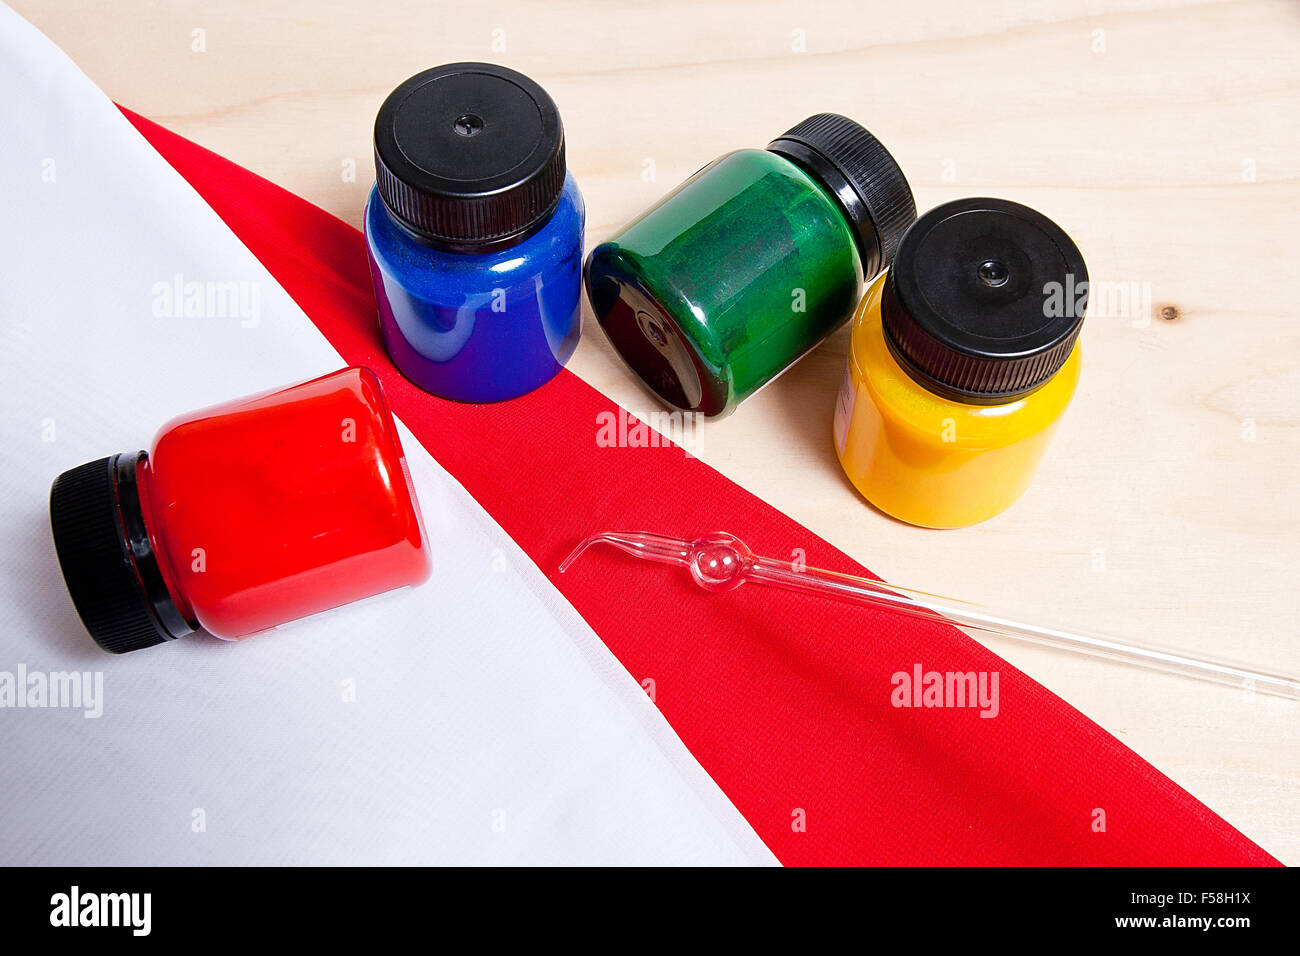 Equipment for cold batik painting isolated on white background. Close up view of different color batik paints and glass tube for Stock Photo